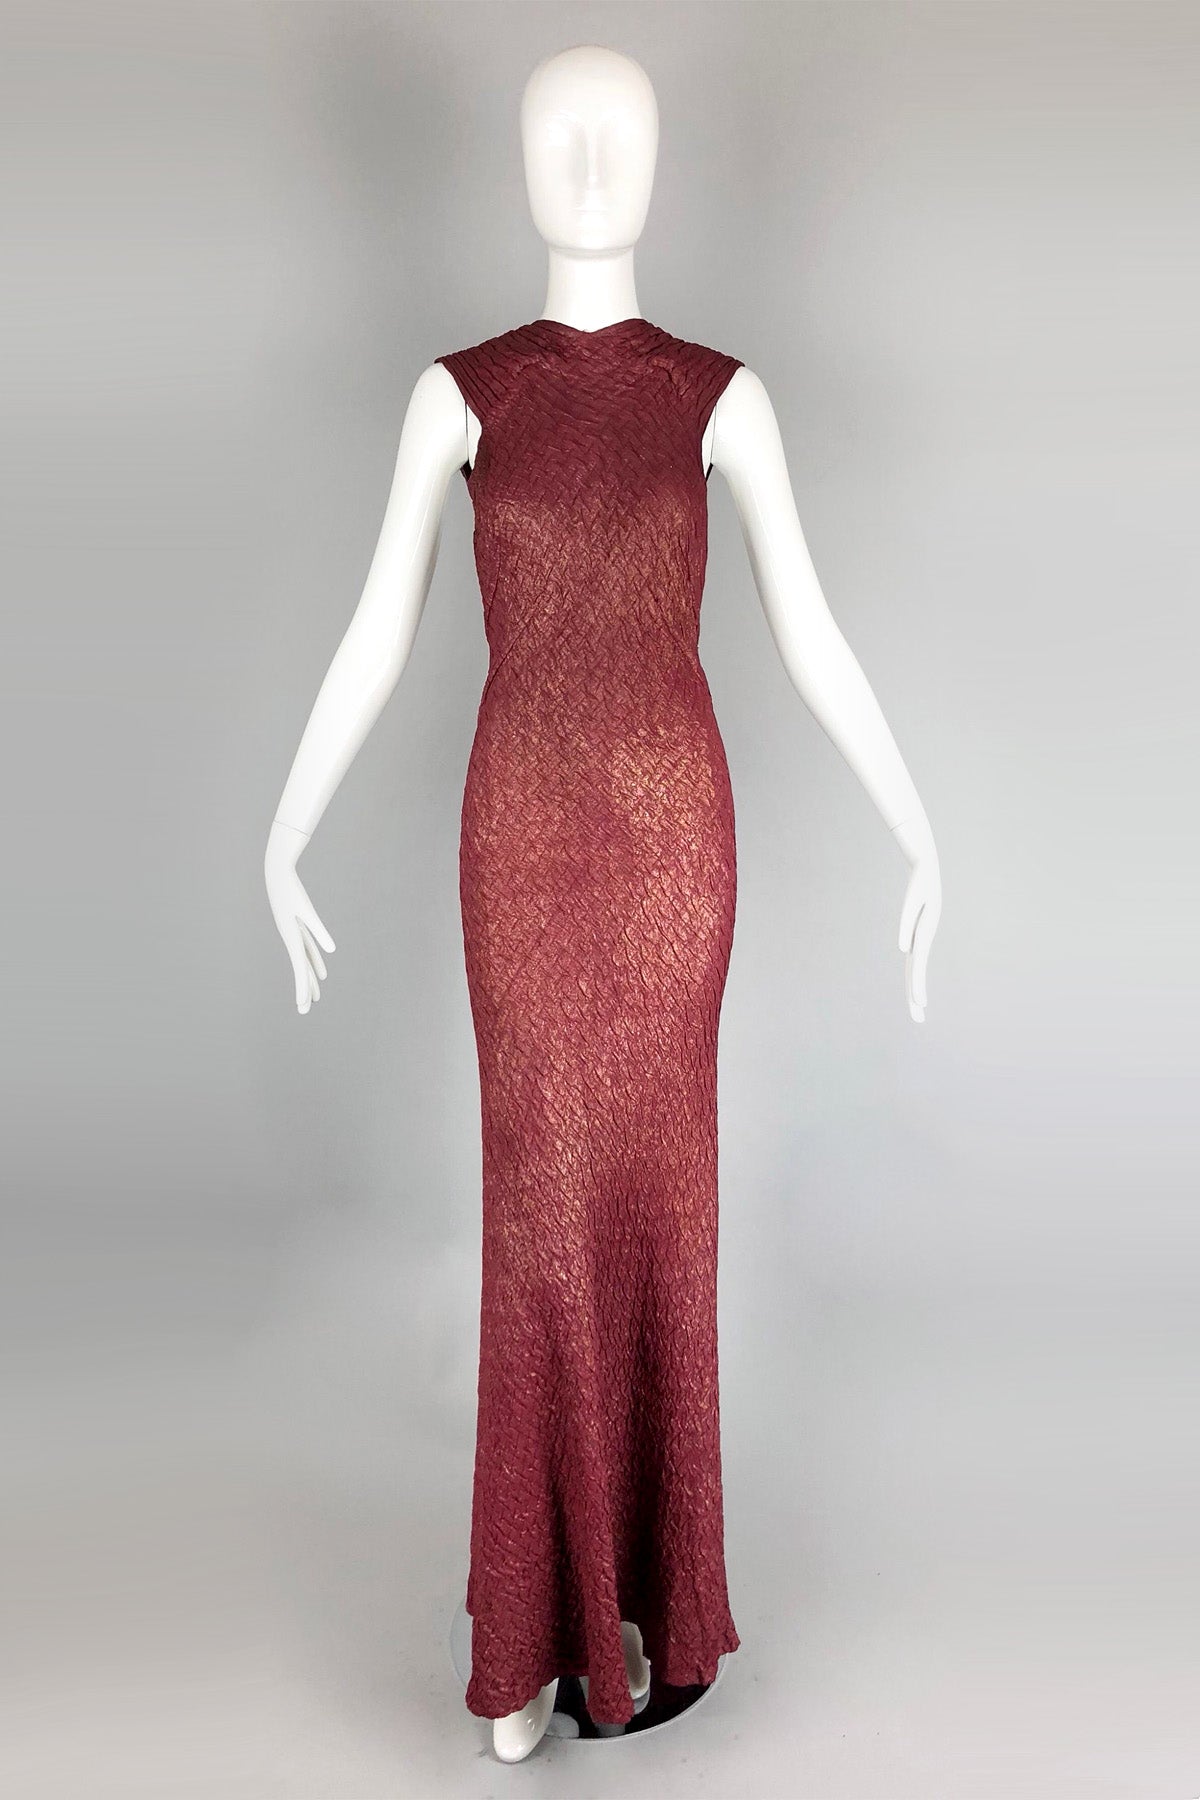 Rare! 1930s Bias Cut Plum and Gold Lamé Old Hollywood Gown with Low Back and Buttons